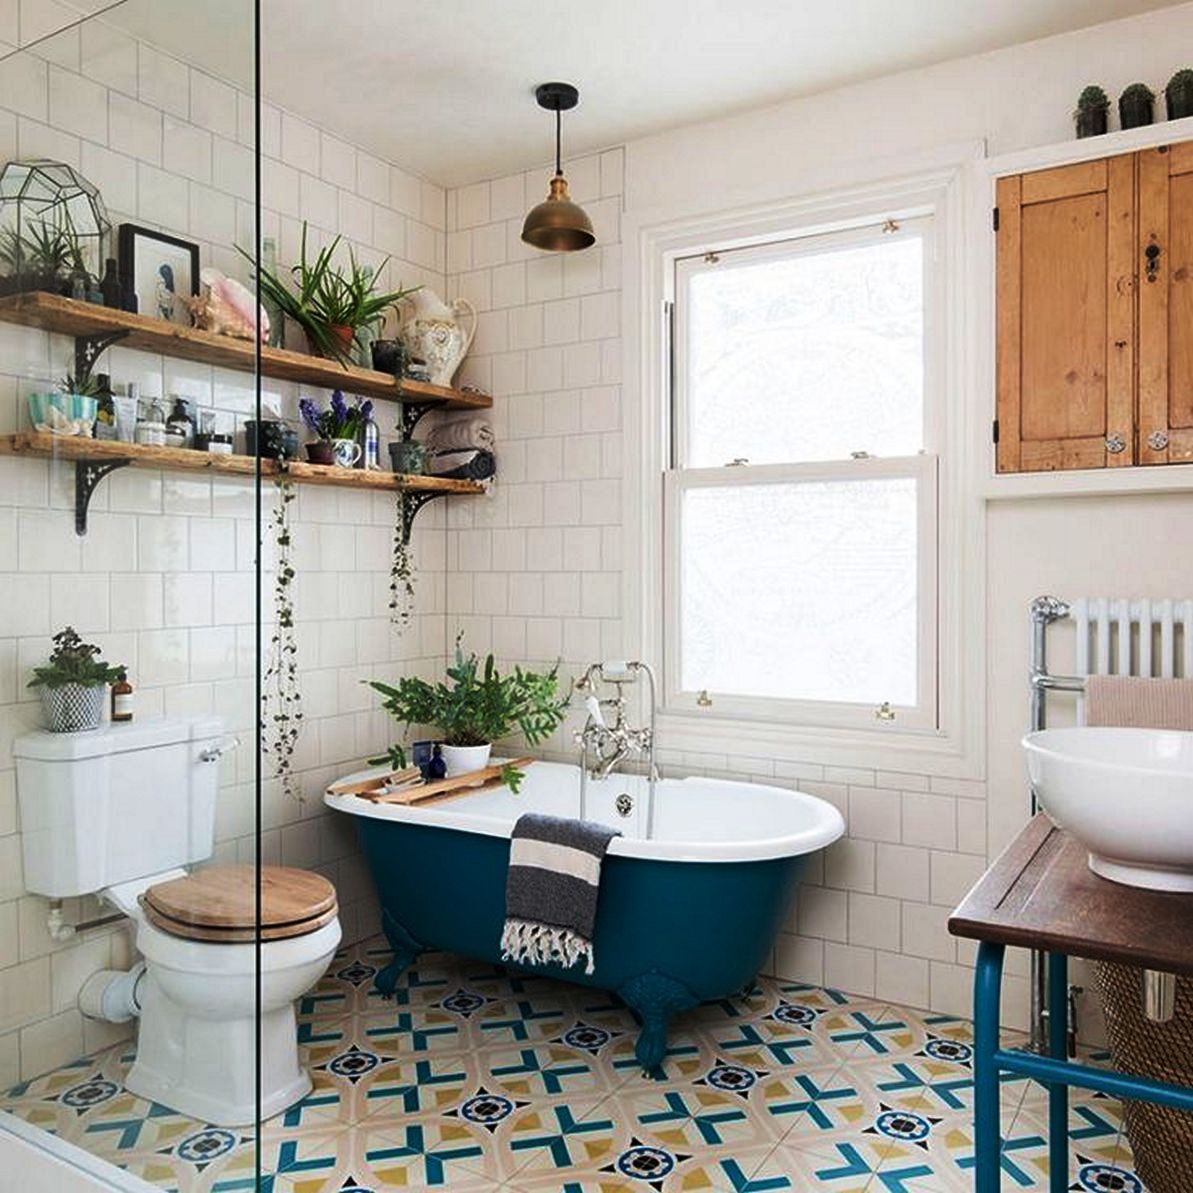 Bathroom trends 2021 the perfect new look for your bathroom remodeling 9